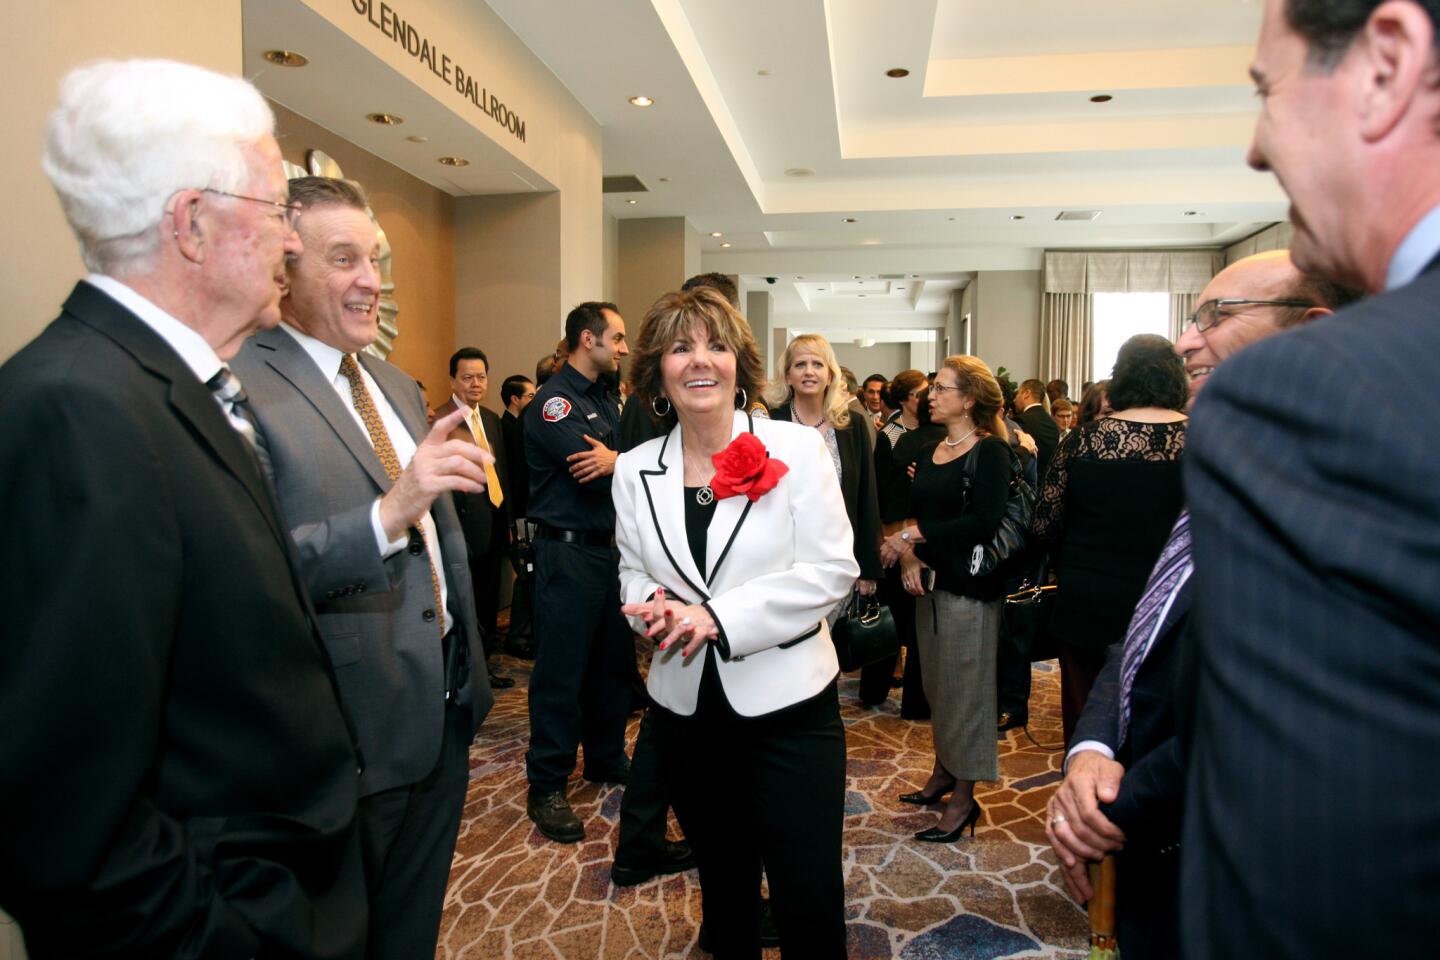 Photo Gallery: Glendale Chamber of Commerce Awards 2017 and State of the City Luncheon